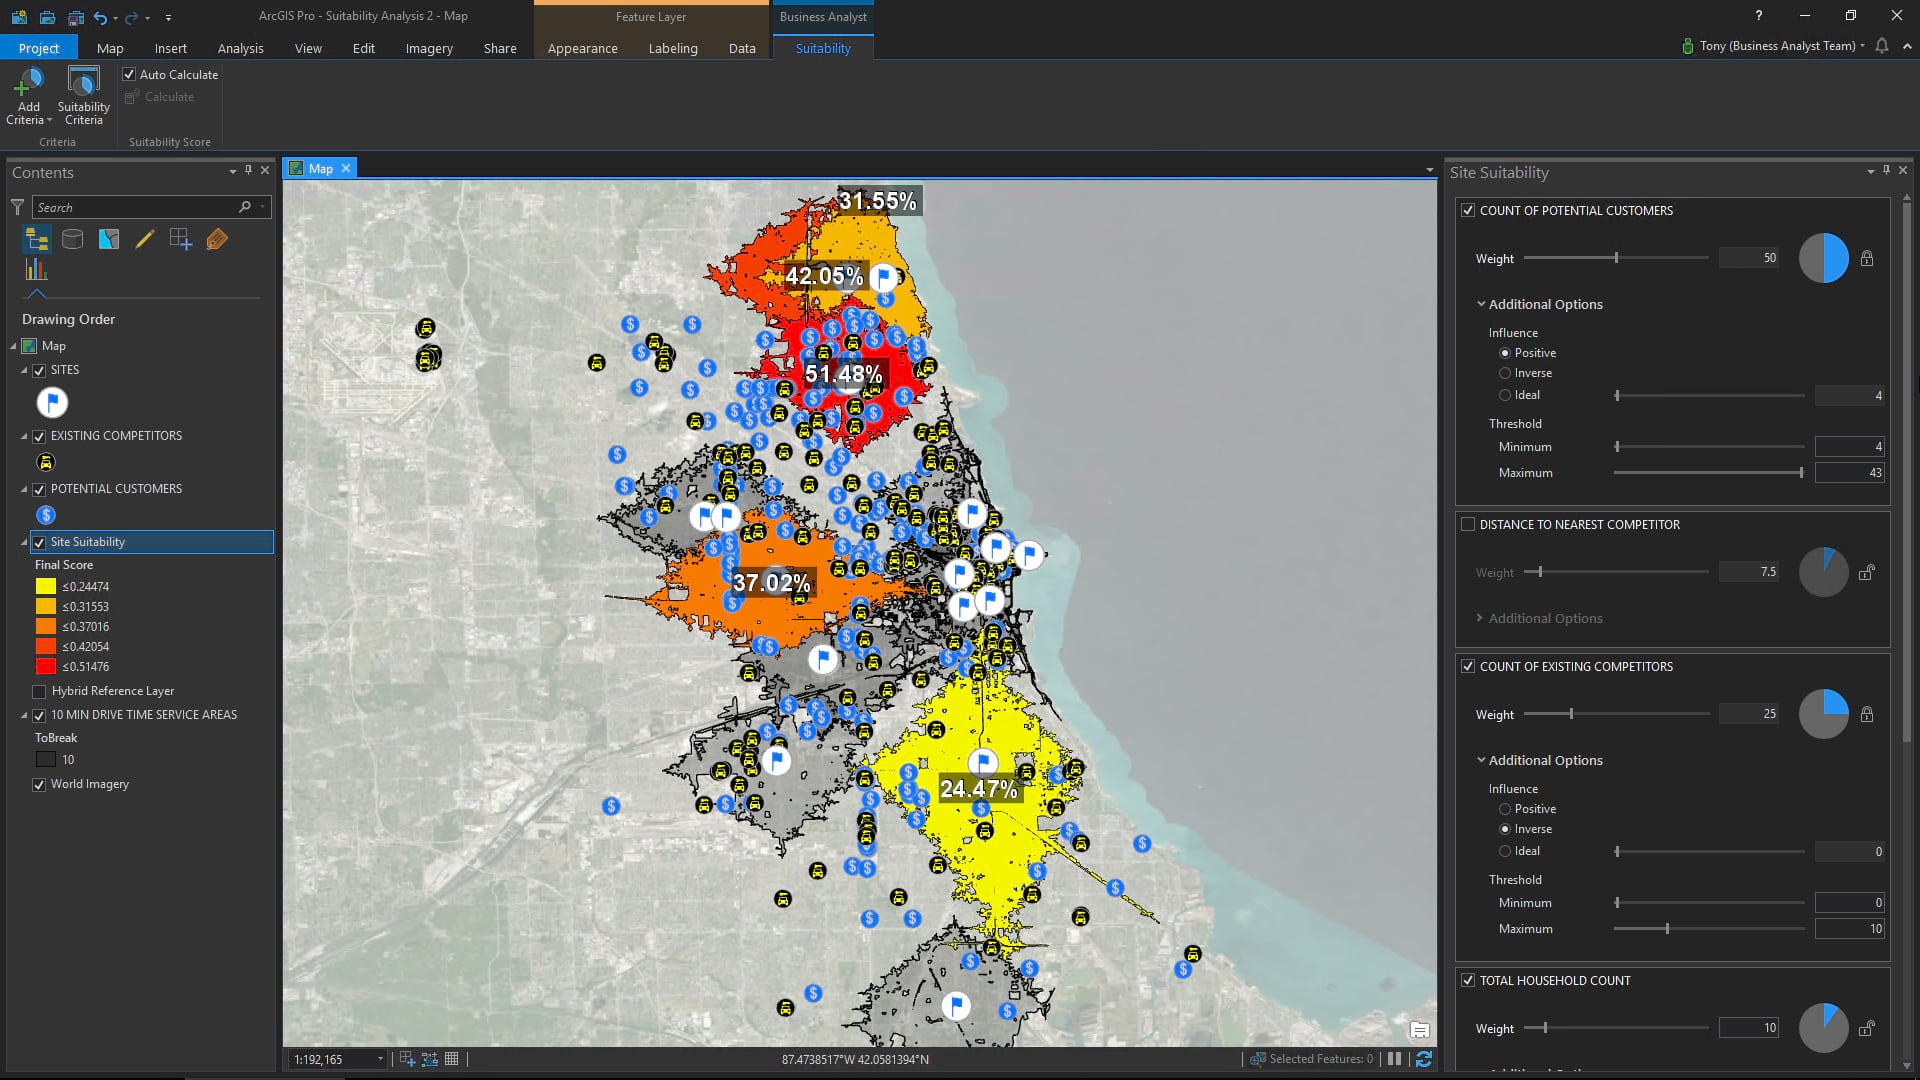 Chicago area site suitability analysis for a potential new location.